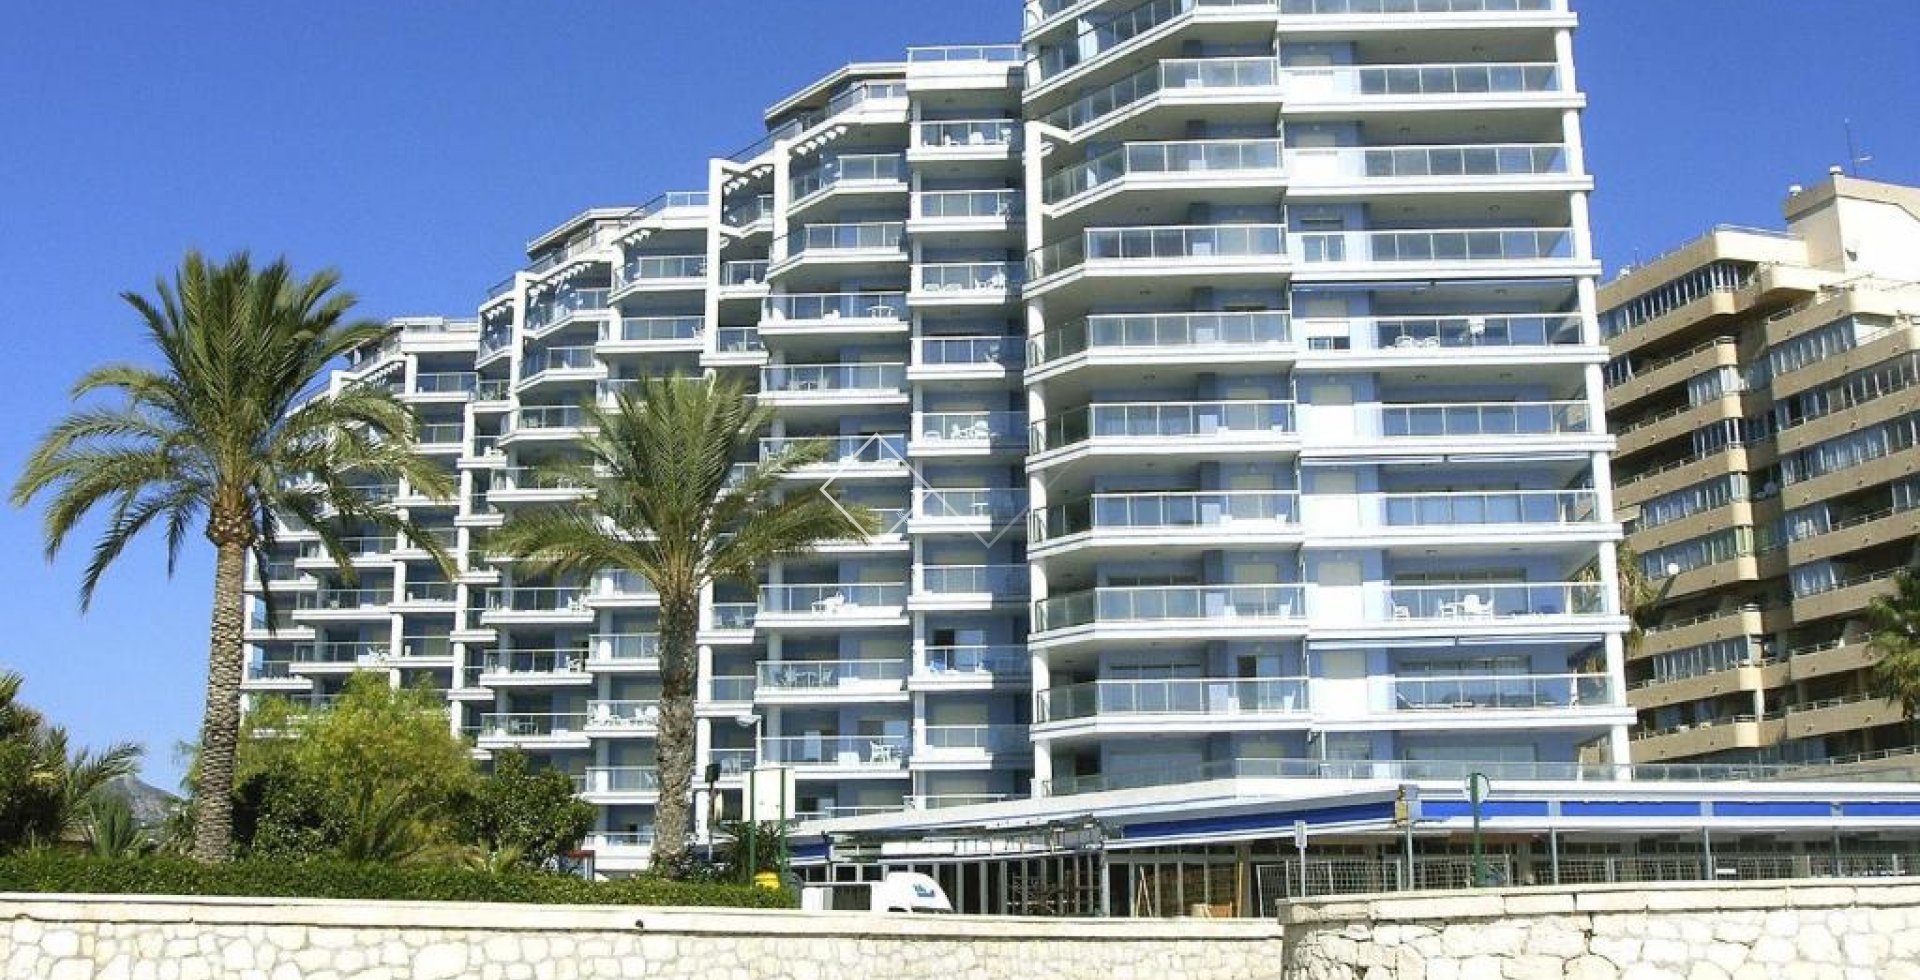 2 bed apartment in Calpe for sale next to beach